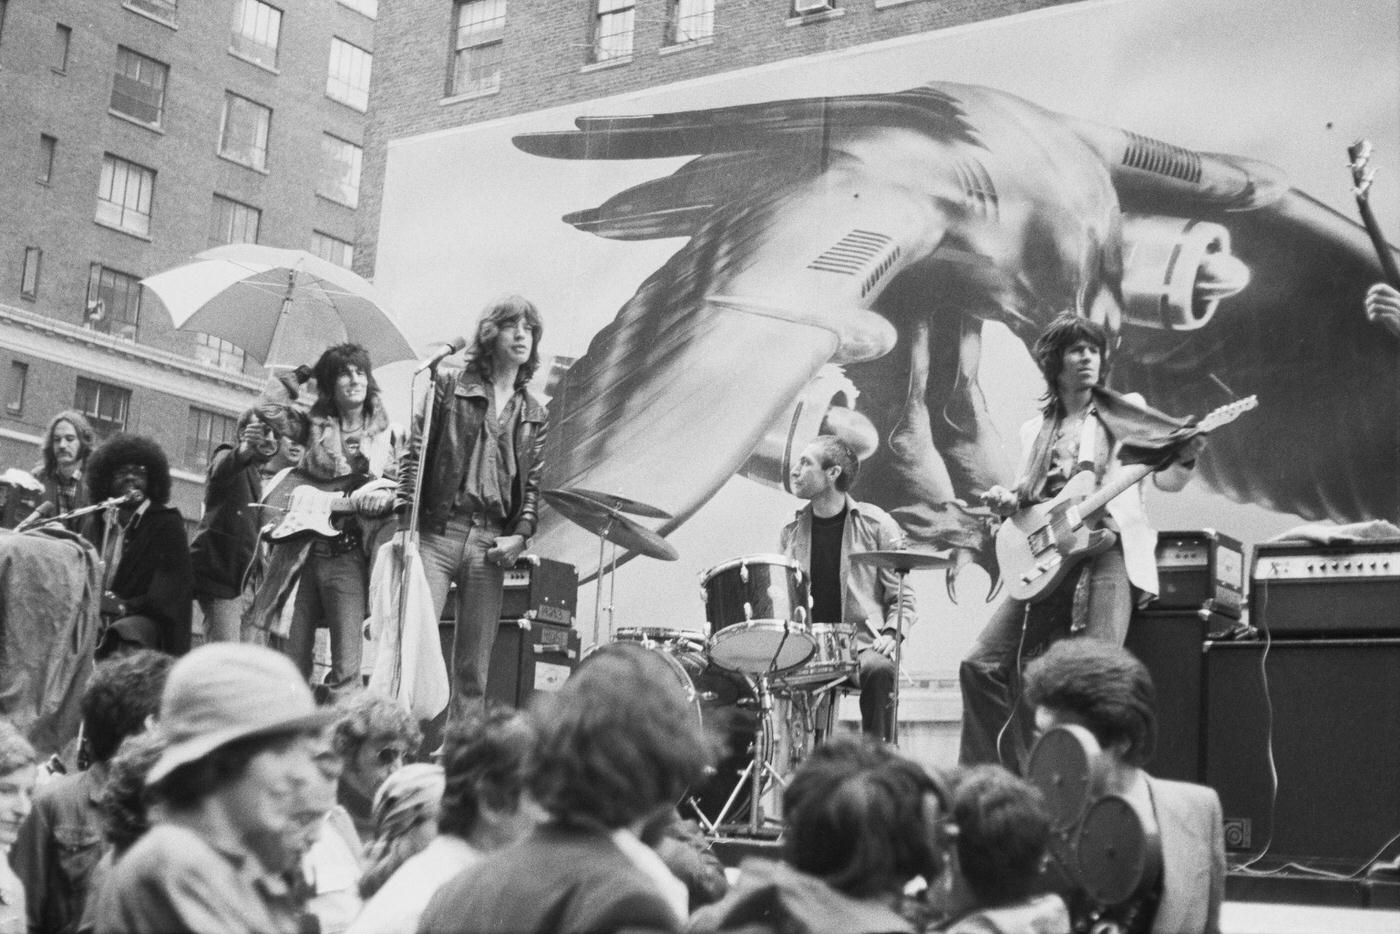 Billy Preston, Ronnie Wood, Mick Jagger, Charlie Watts, and Keith Richards perform on a flatbed truck on Fifth Avenue, New York City, 1975.